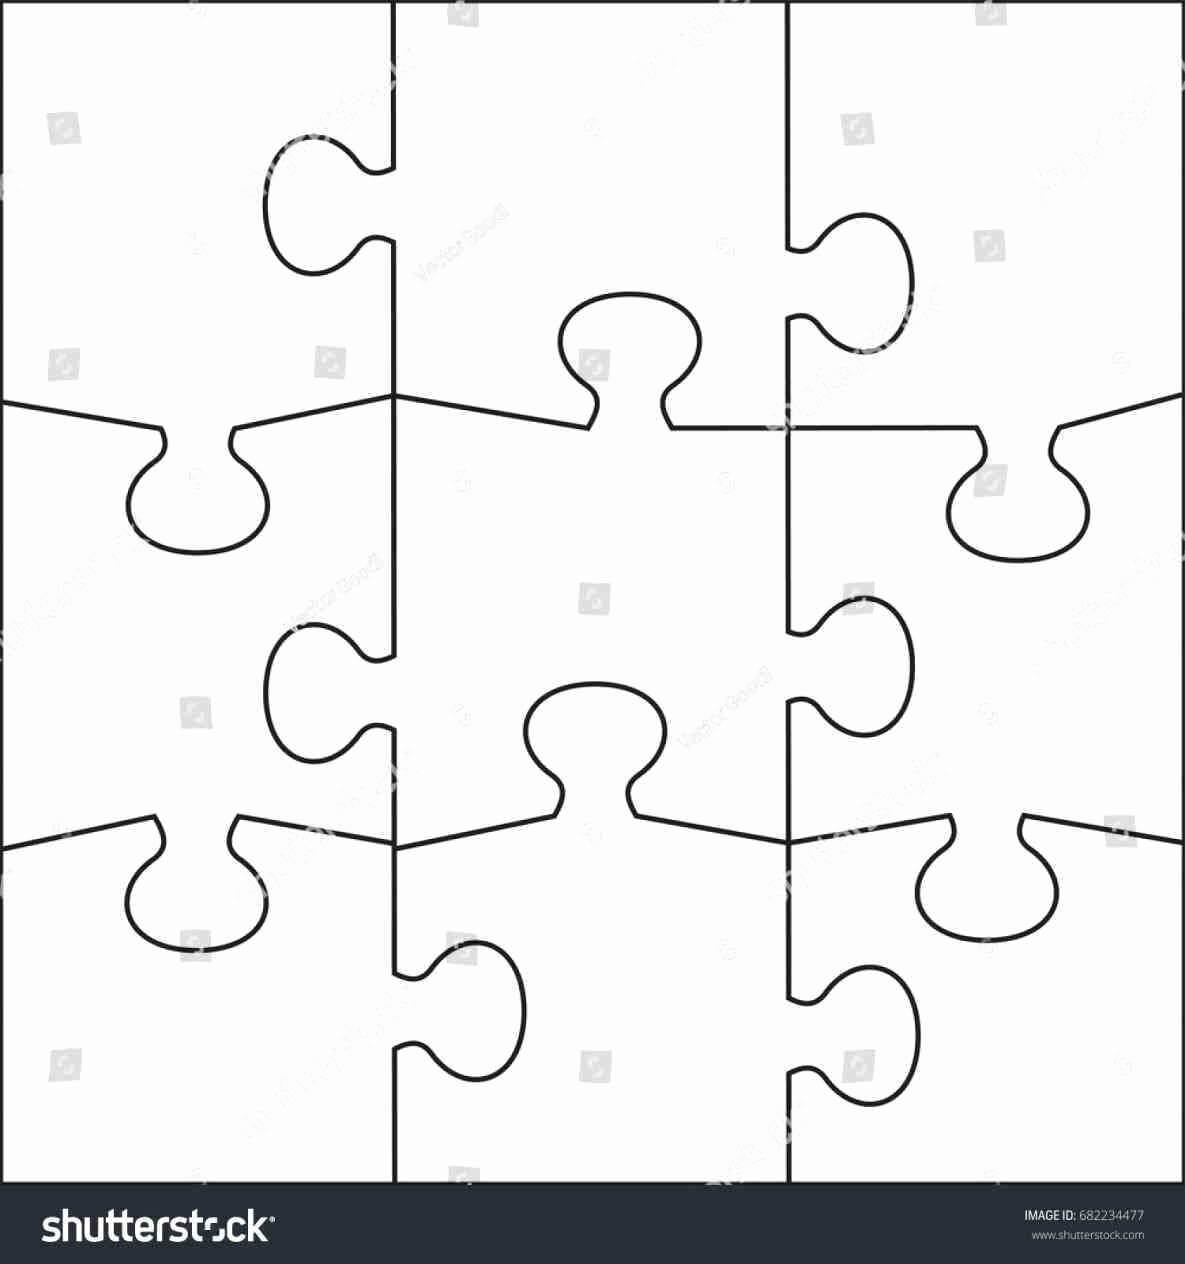 Puzzle Pieces Template For Word Fresh 9 Piece Jigsaw Puzzle In Jigsaw Puzzle Template For Word